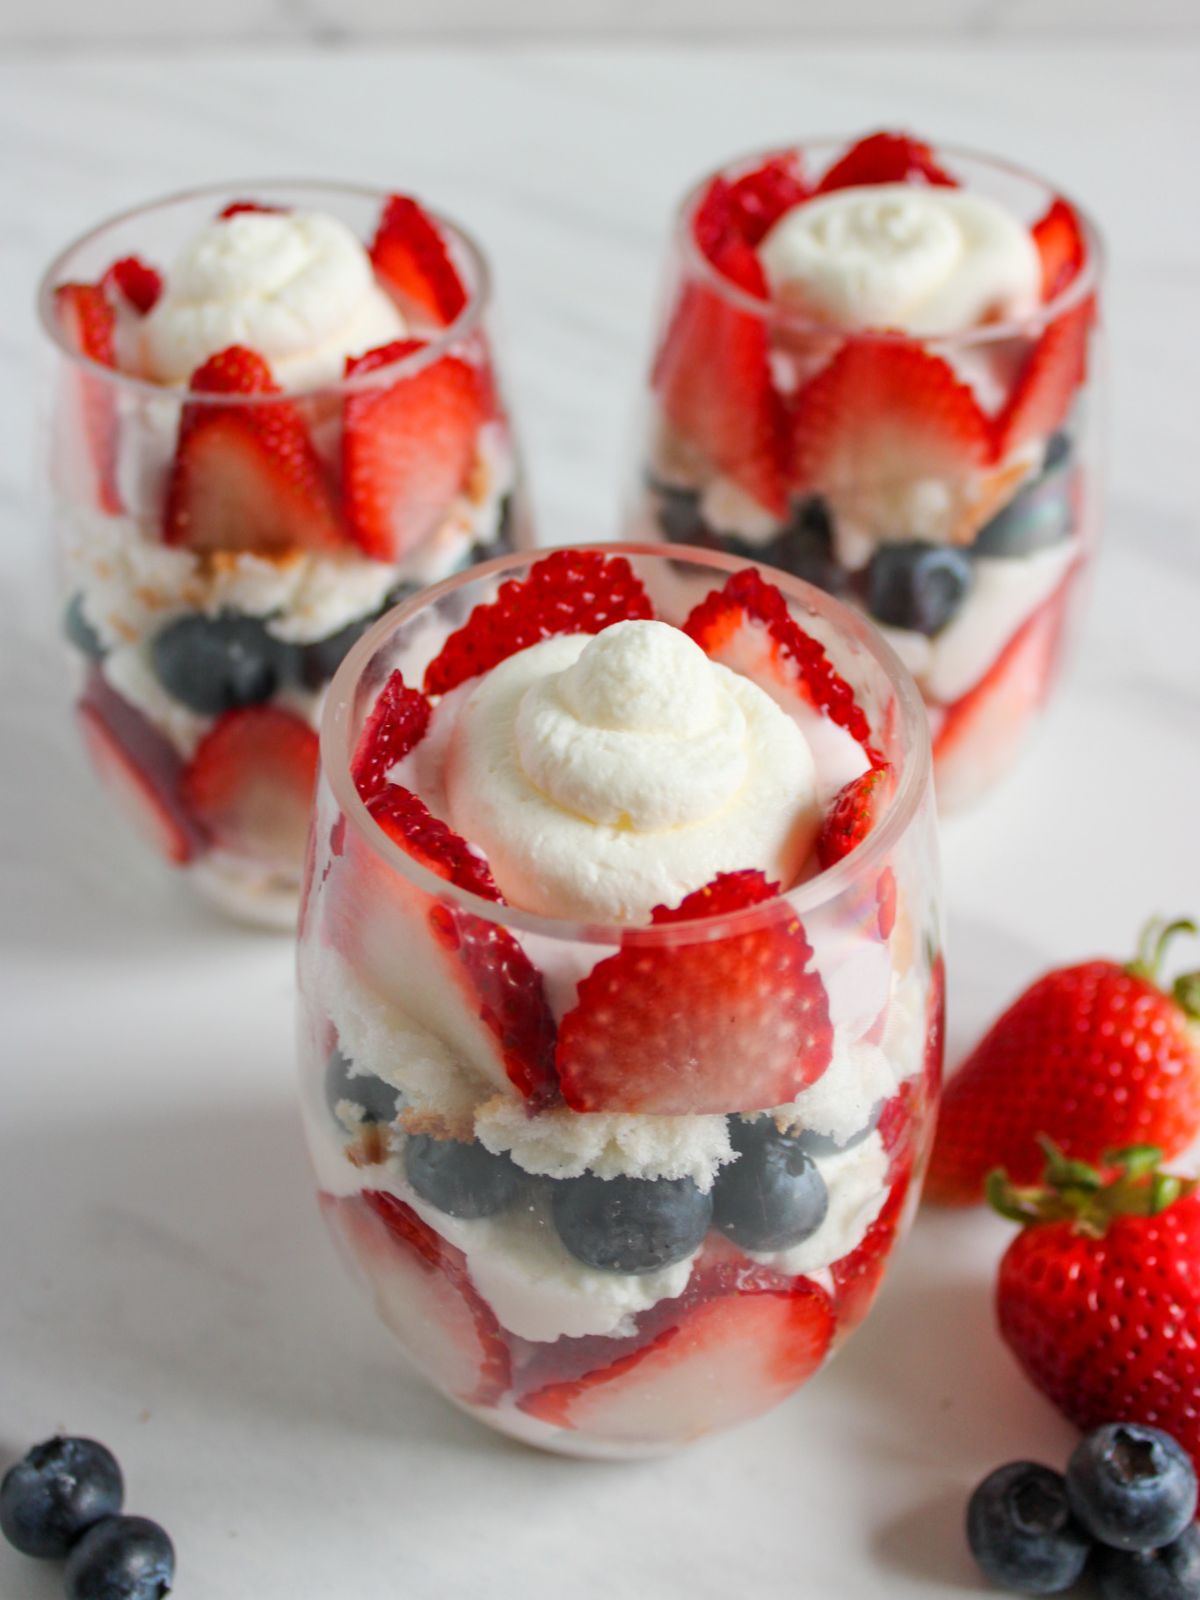 3 glasses of berries and whipped cream parfaits.